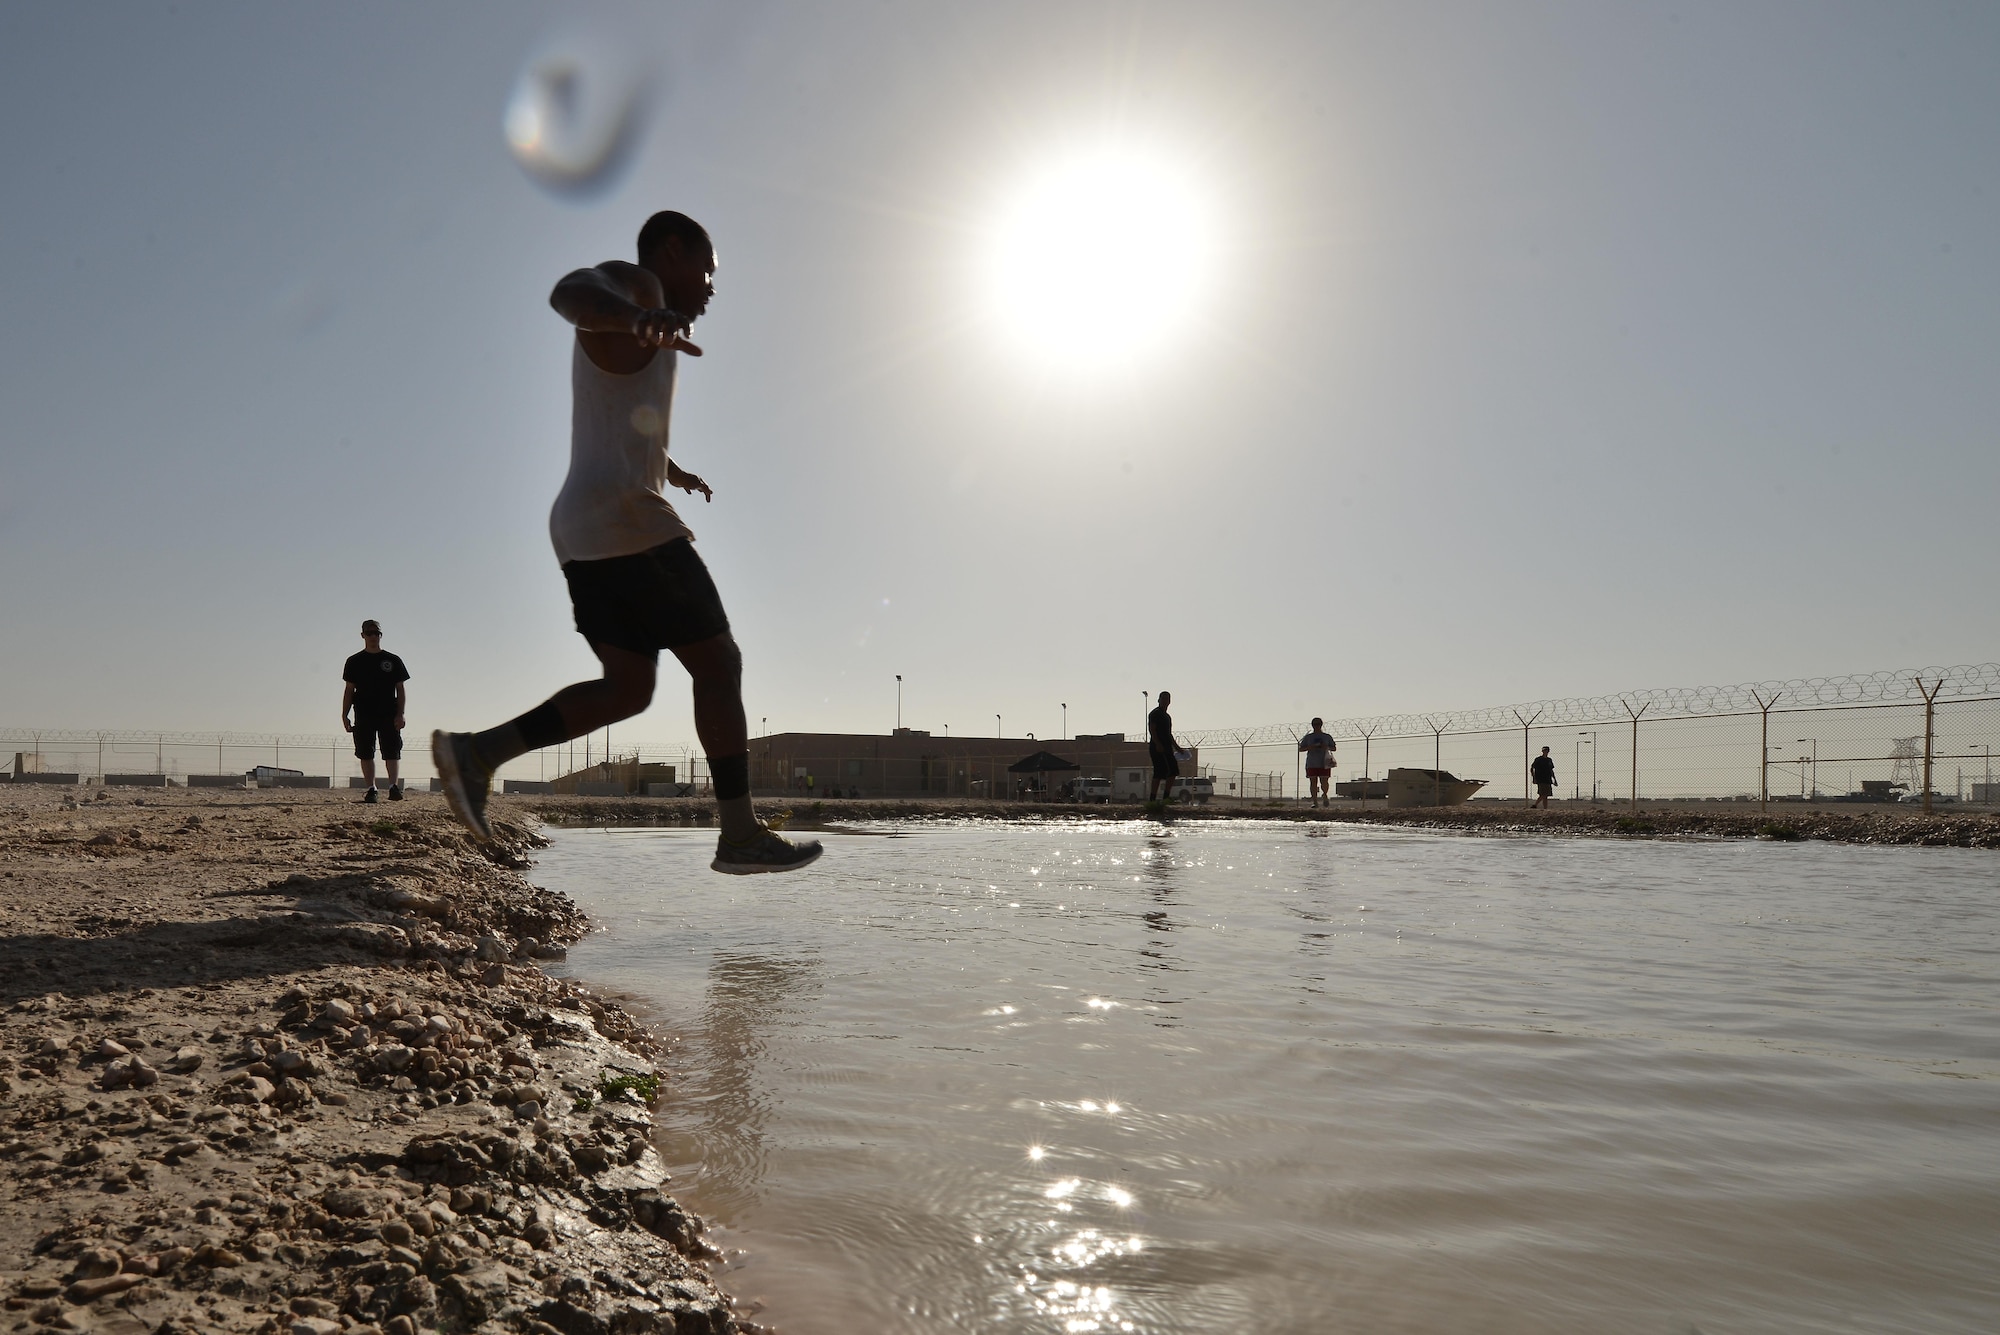 Teams were given their final times as they entered a mud pool at the end of the Diversity Day mud run September 20, 2015 at Al Udeid Air Base, Qatar. The mud run challenged 106 runners with a two mile course that contained several obstacles from low crawling, T-wall climb, barrier hurdles, and Ôdeep freezeÕ cold mud pool. The event was held to help spread the word of Diversity Day, an initiative started by the Department of Defense for events held throughout the year. (U.S. Air Force photo/ Staff Sgt. Alexandre Montes)  